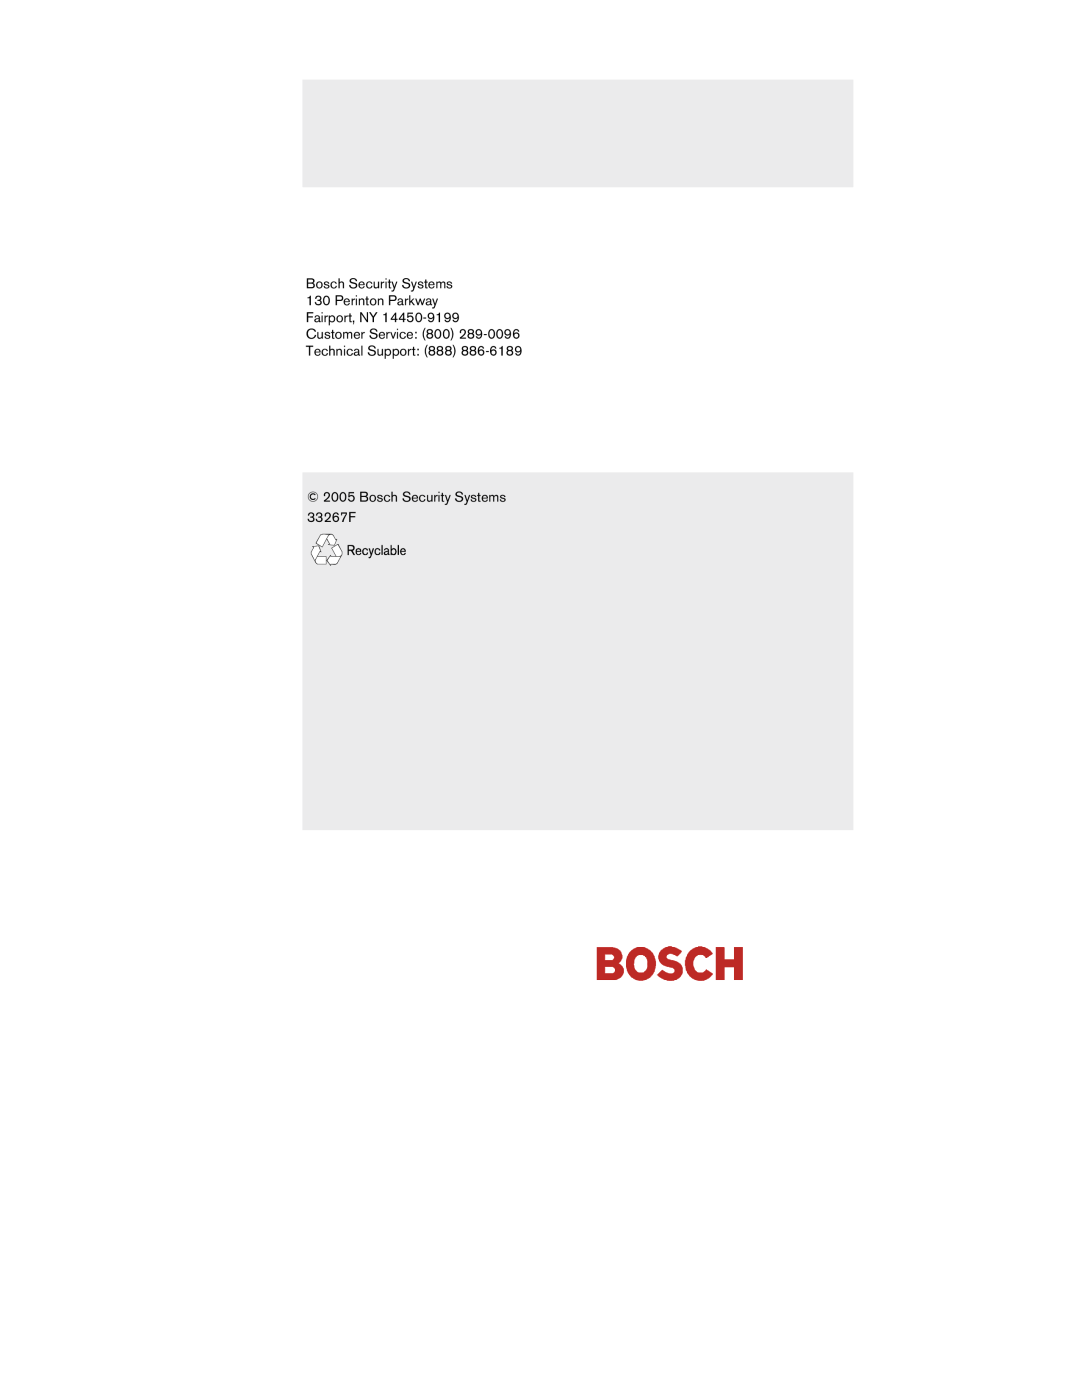 Bosch Appliances G, D9000 Bosch Security Systems 130 Perinton Parkway, Fairport, NY Customer Service, Technical Support 